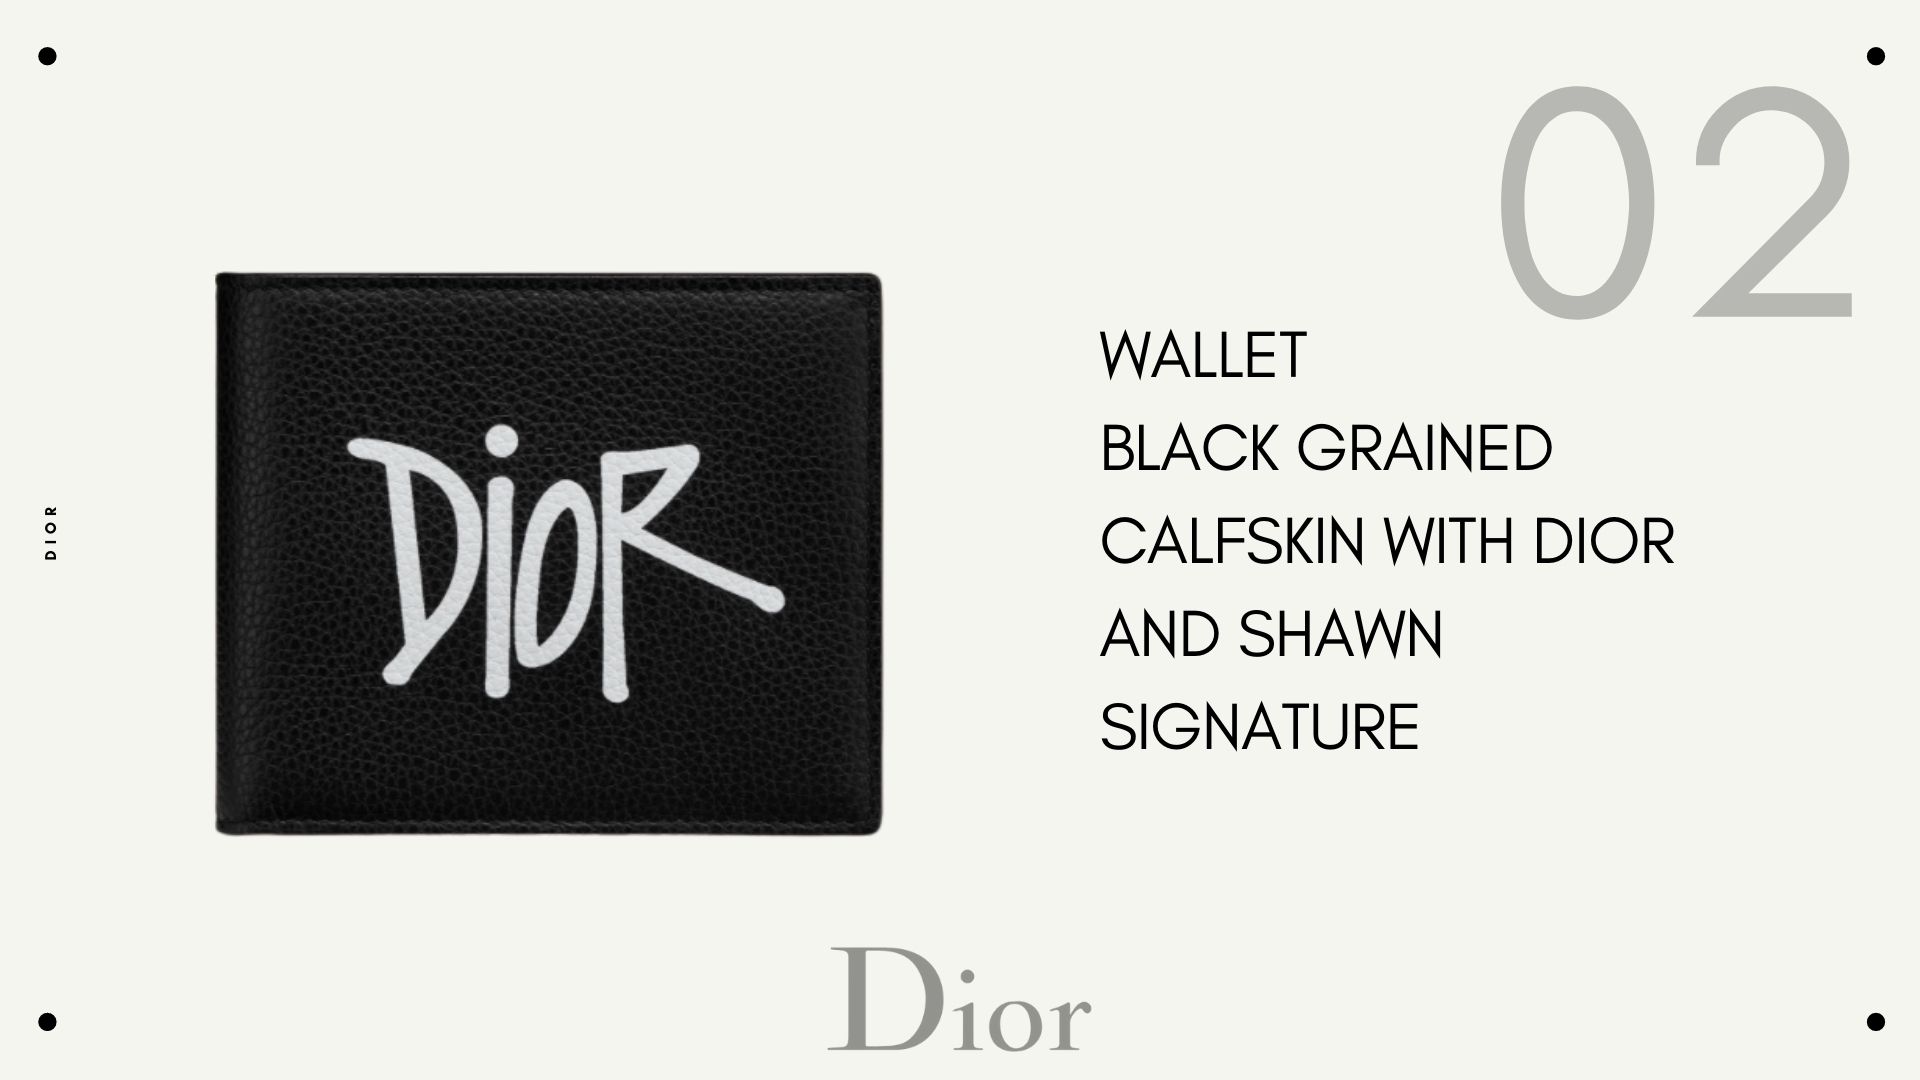 WALLET Black Grained Calfskin with DIOR AND SHAWN Signature